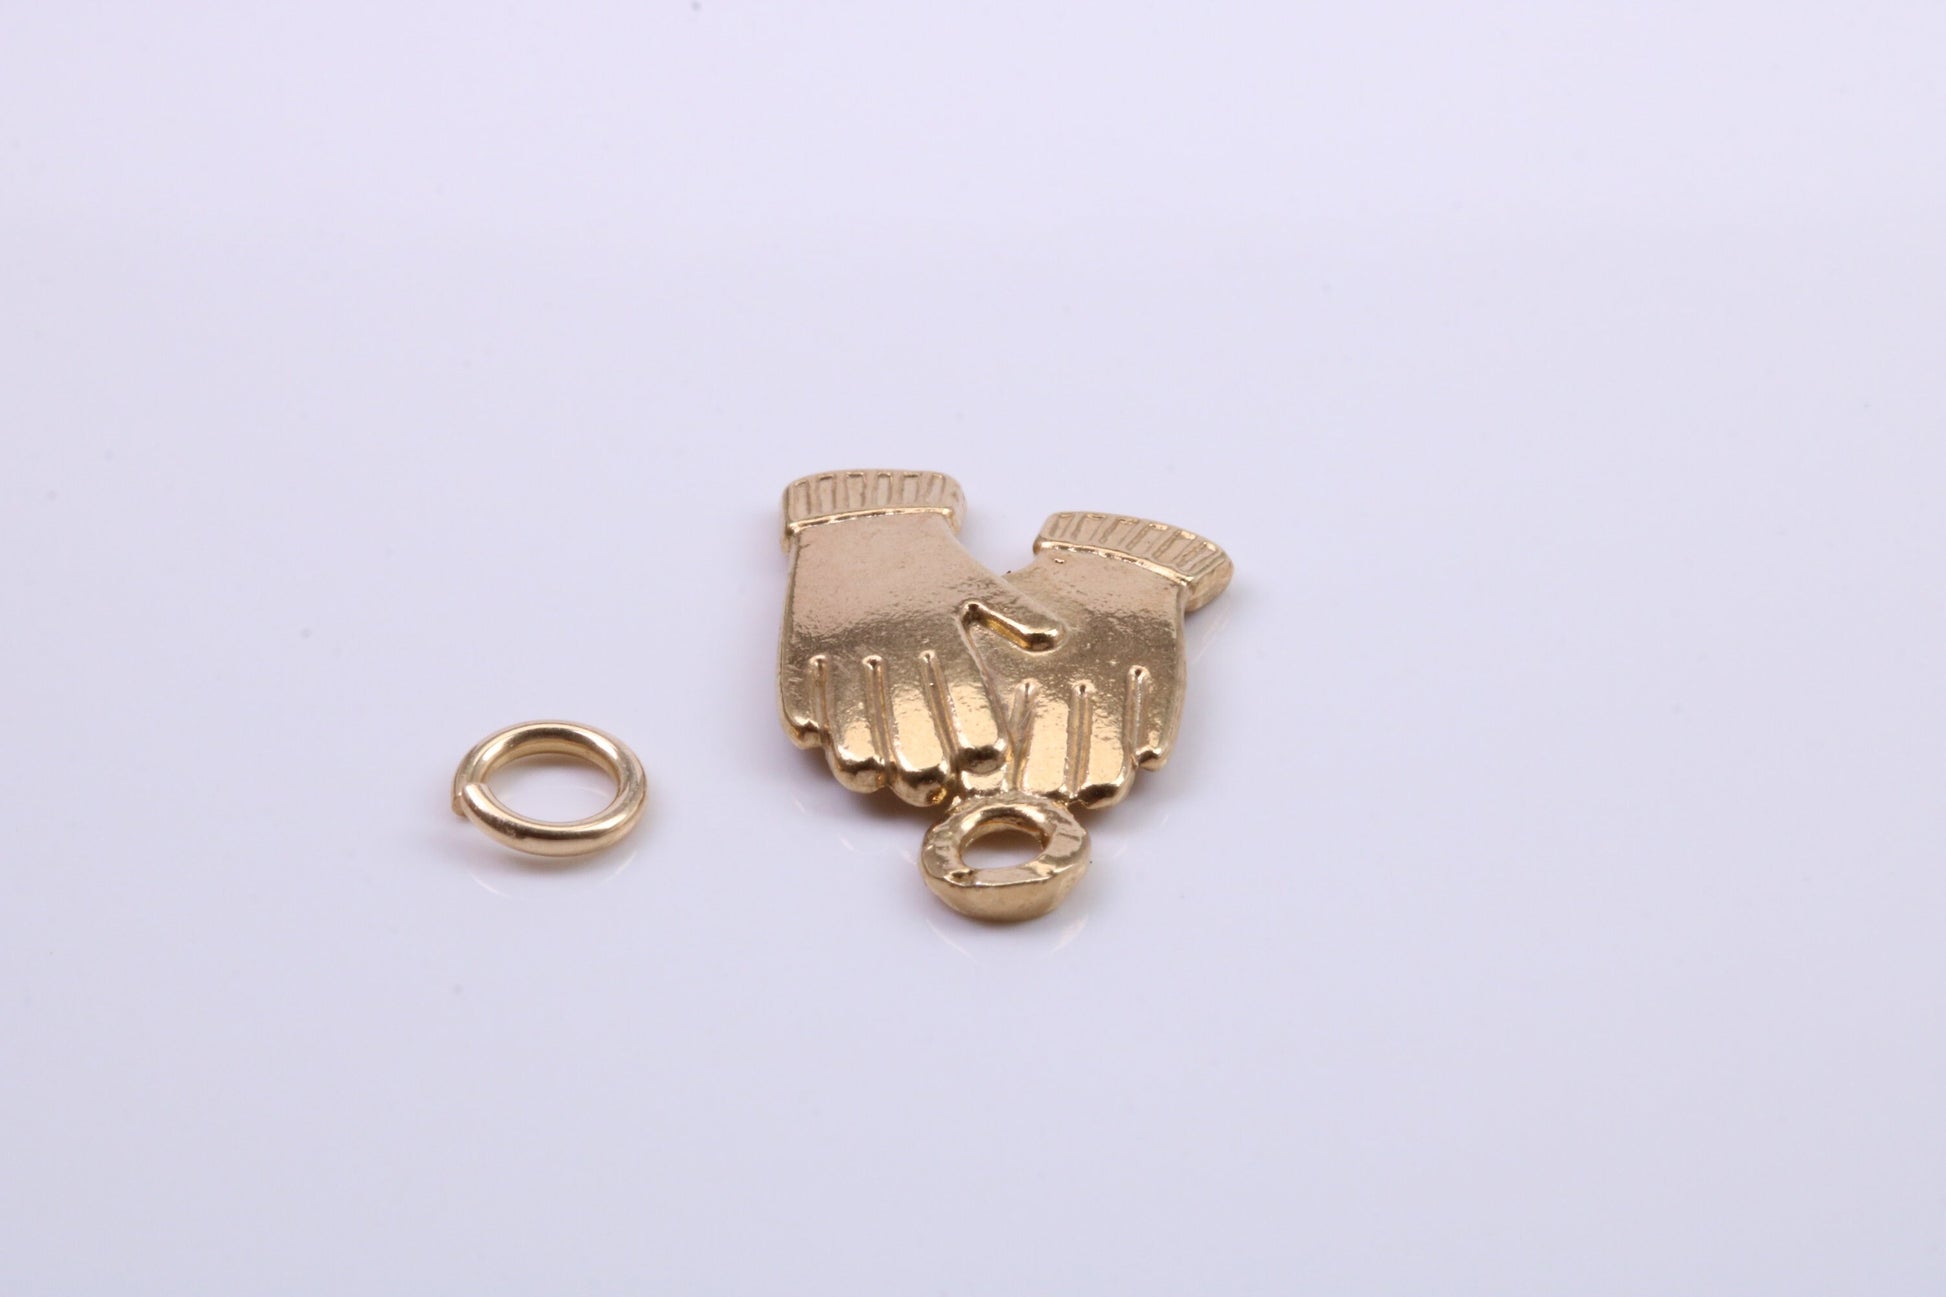 Gloves Charm, Traditional Charm, Made from Solid 9ct Yellow Gold, British Hallmarked, Complete with Attachment Link